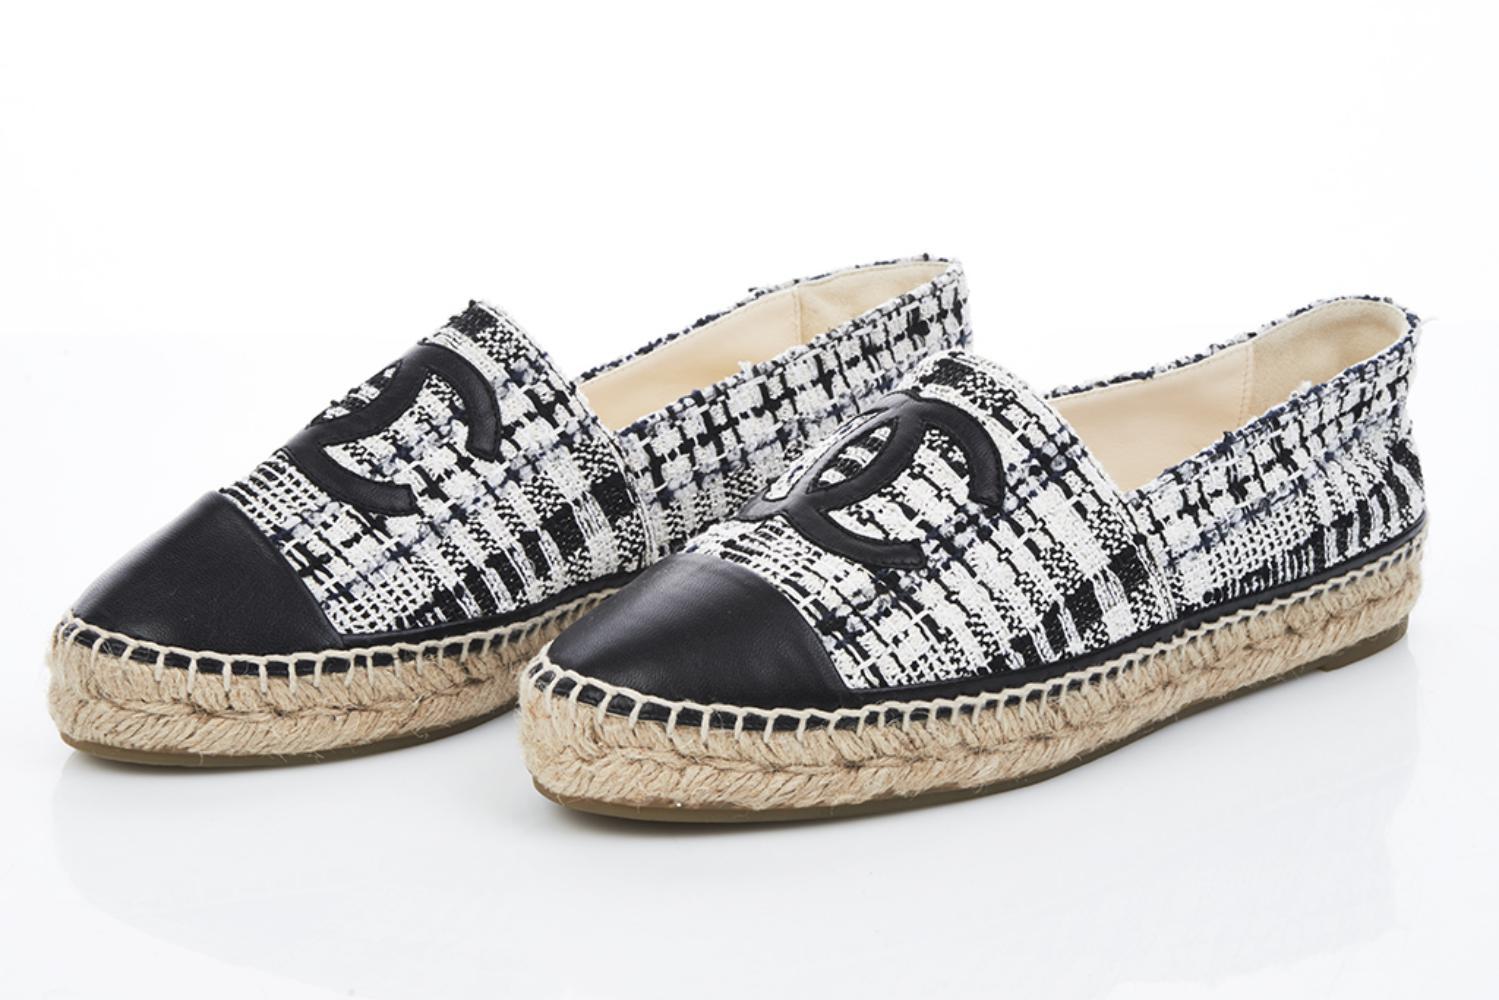 Black and White Chanel Espadrilles